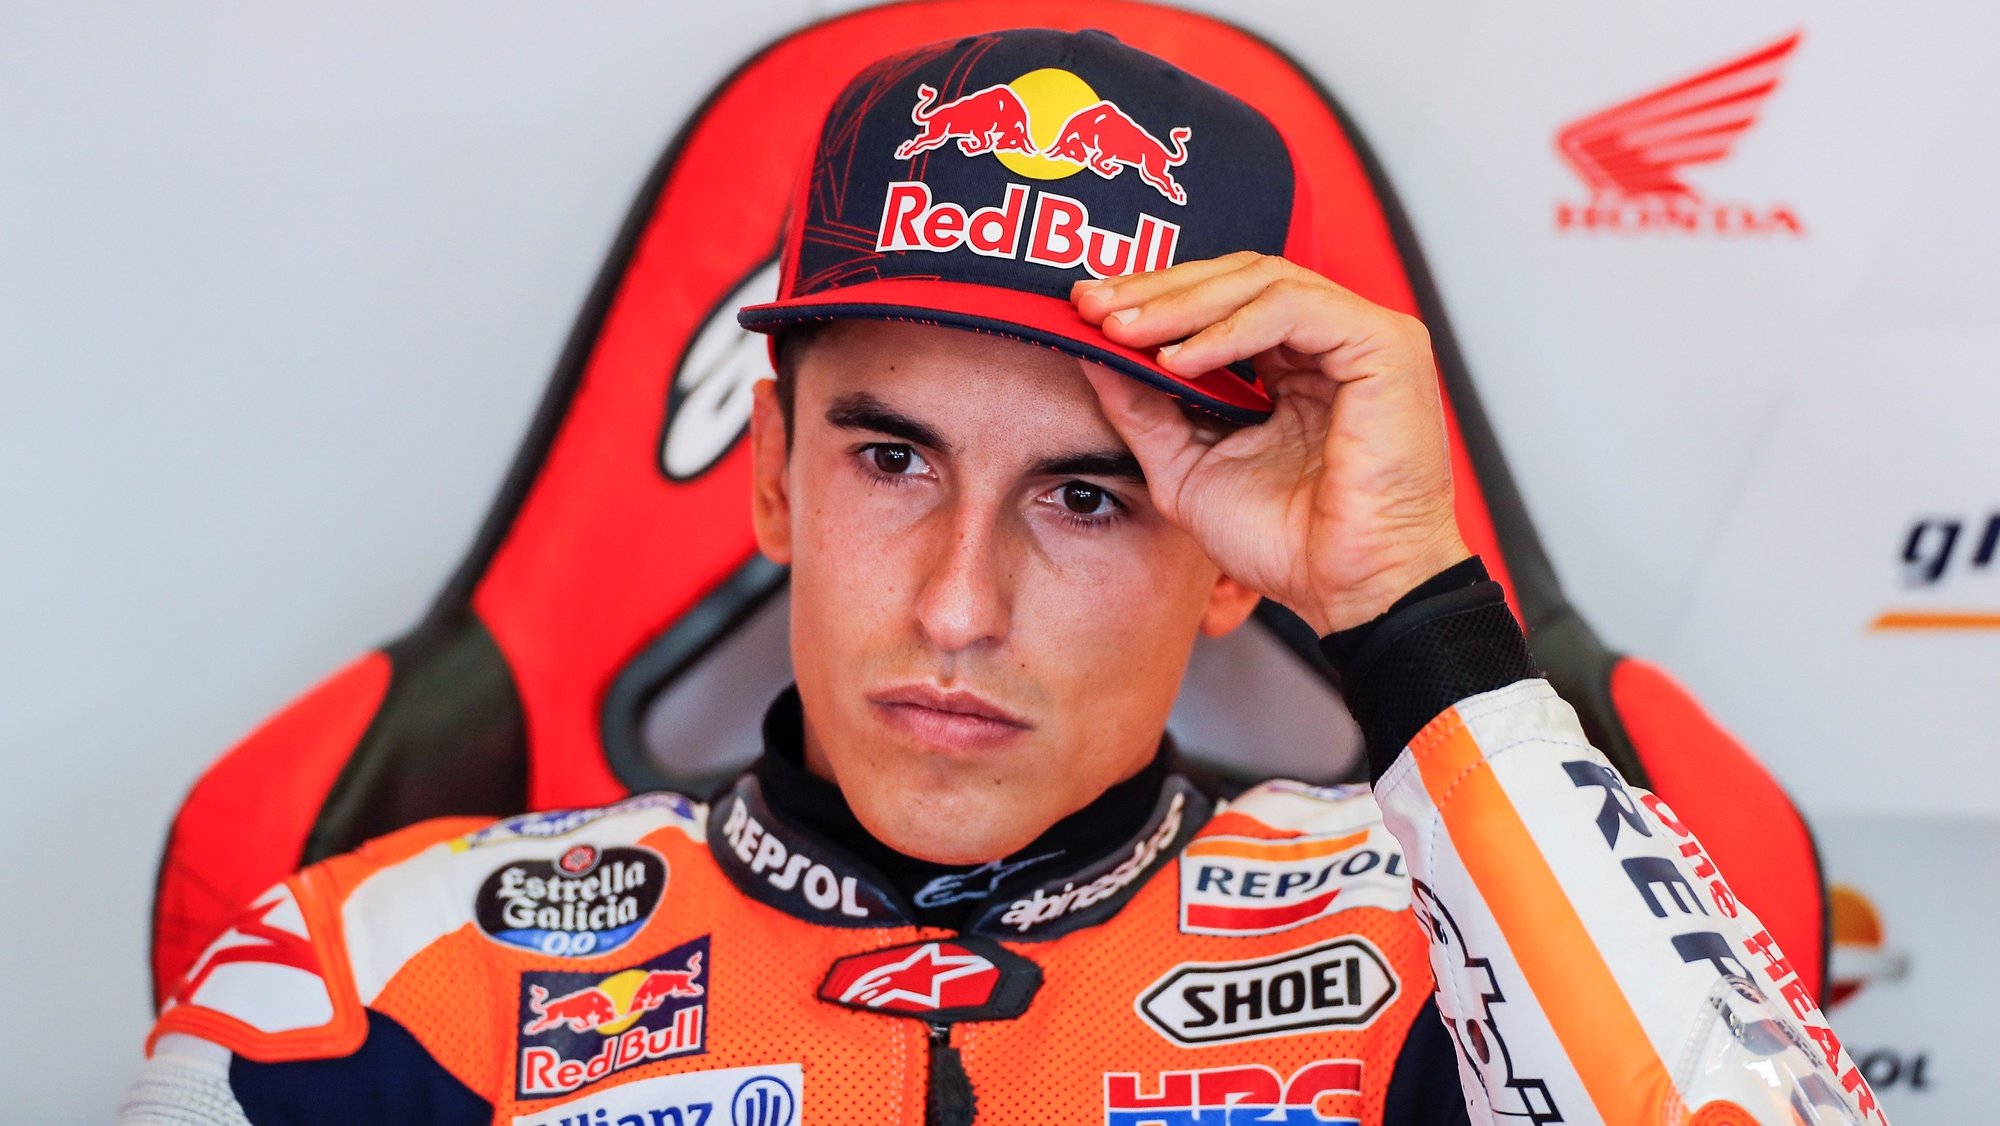 epa08565347 Spanish MotoGP rider Marc Marquez of Repsol Honda team rests in his garage before he takes part in a free training session at Circuito de Jerez-Angel Nieto circuit, in Jerez, southern Spain, 25 July 2020. The Red Bull Andalusia GP race will be held on 26 July behind closed doors due to COVID-19 pandemic.  EPA/ROMAN RIOS